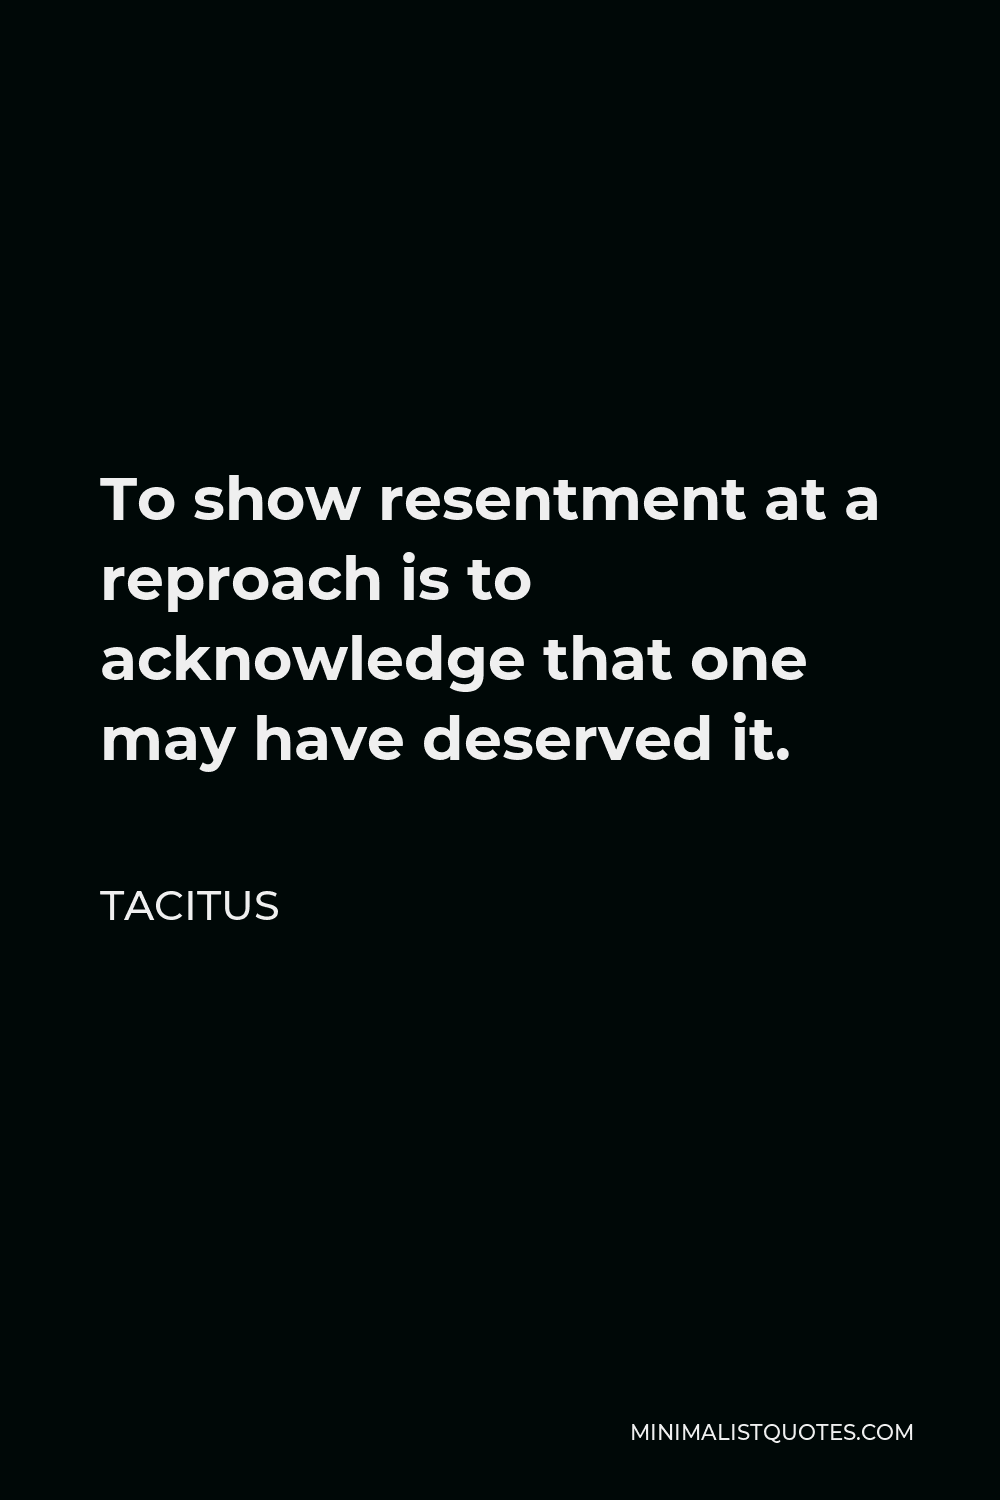 Tacitus Quote - To show resentment at a reproach is to acknowledge that one may have deserved it.